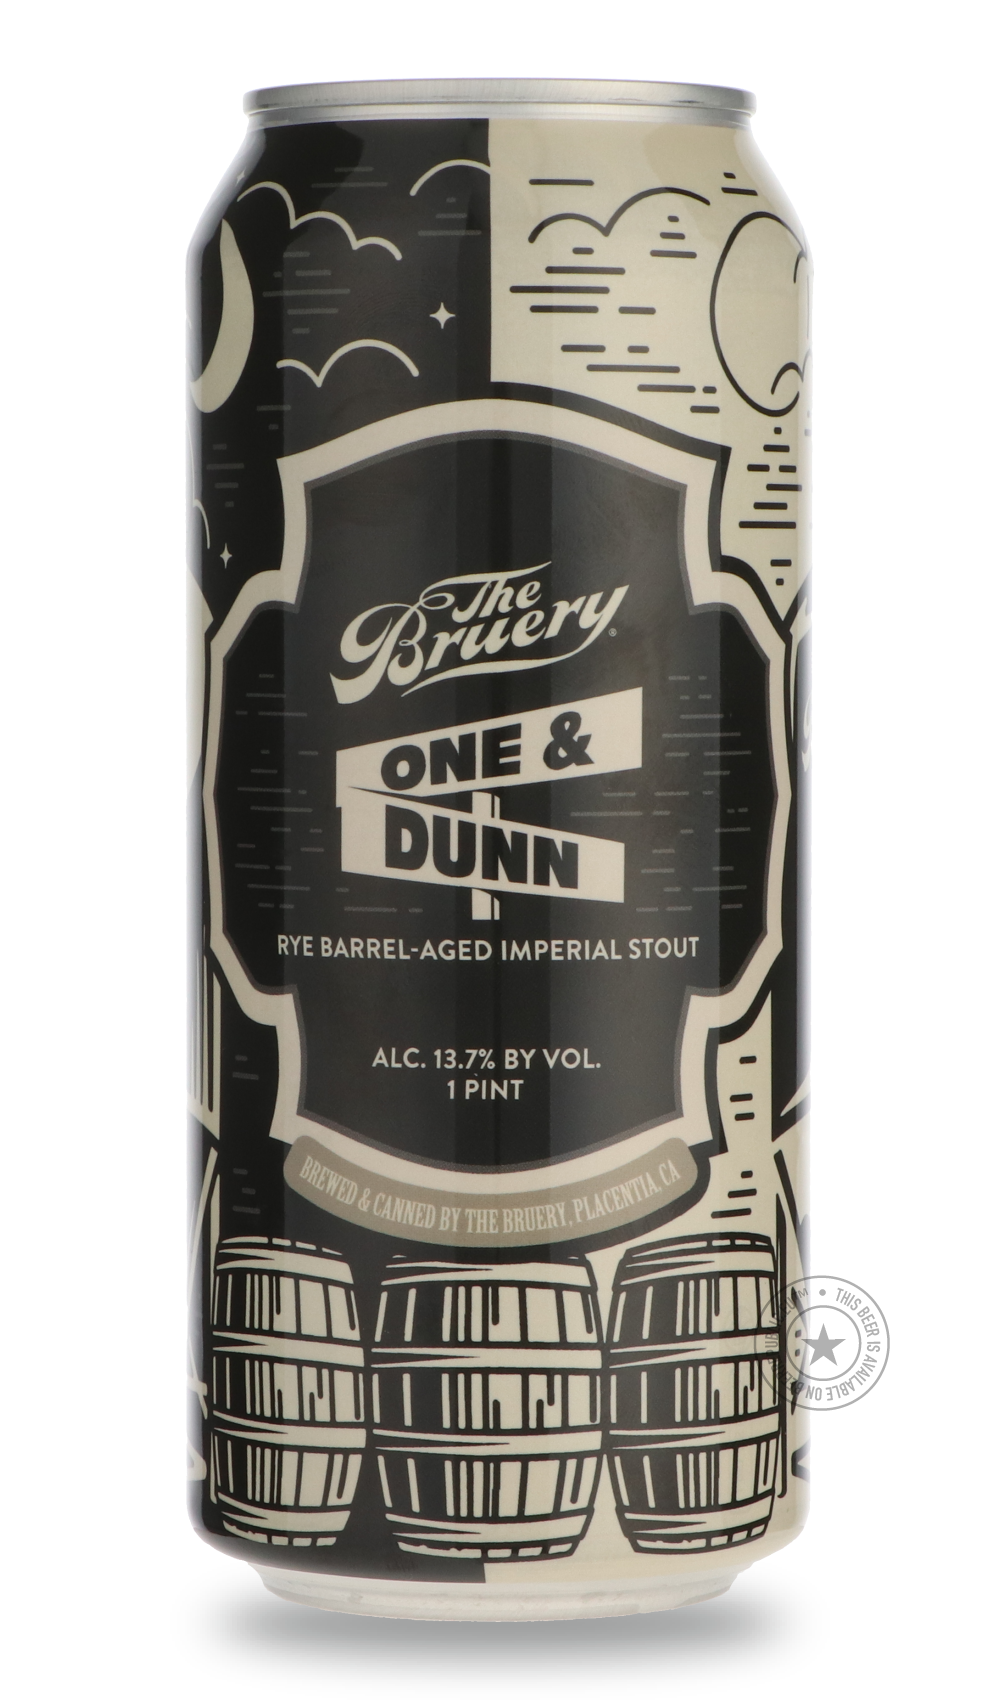 -The Bruery- One & Dunn / Boulevard-Stout & Porter- Only @ Beer Republic - The best online beer store for American & Canadian craft beer - Buy beer online from the USA and Canada - Bier online kopen - Amerikaans bier kopen - Craft beer store - Craft beer kopen - Amerikanisch bier kaufen - Bier online kaufen - Acheter biere online - IPA - Stout - Porter - New England IPA - Hazy IPA - Imperial Stout - Barrel Aged - Barrel Aged Imperial Stout - Brown - Dark beer - Blond - Blonde - Pilsner - Lager - Wheat - Wei